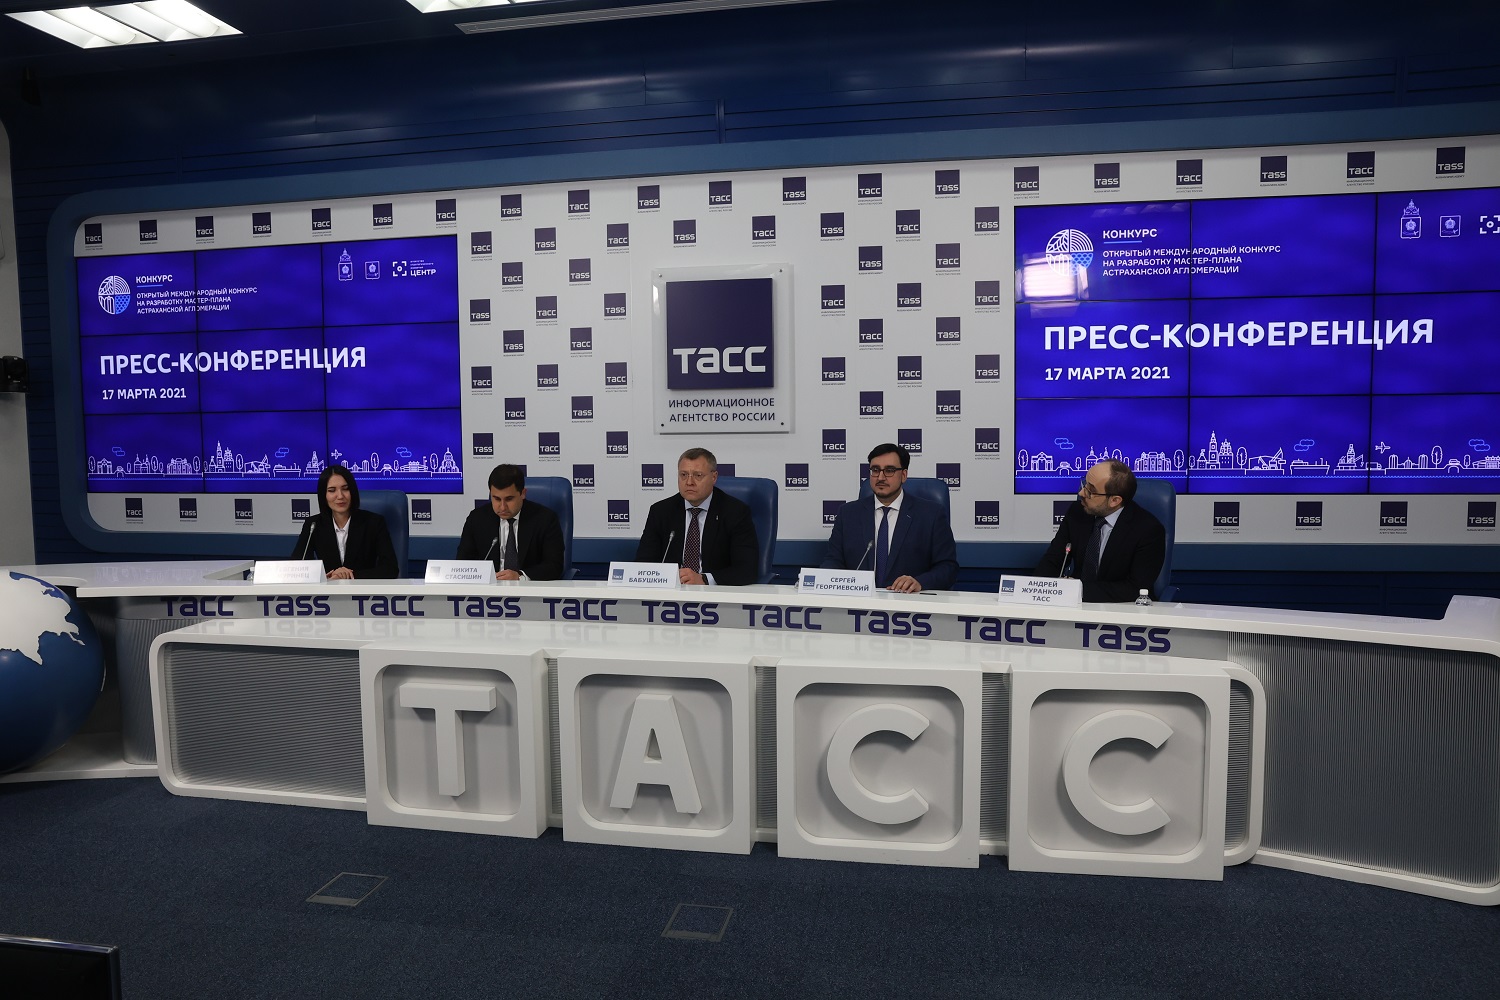 TASS announced the start of an International competition